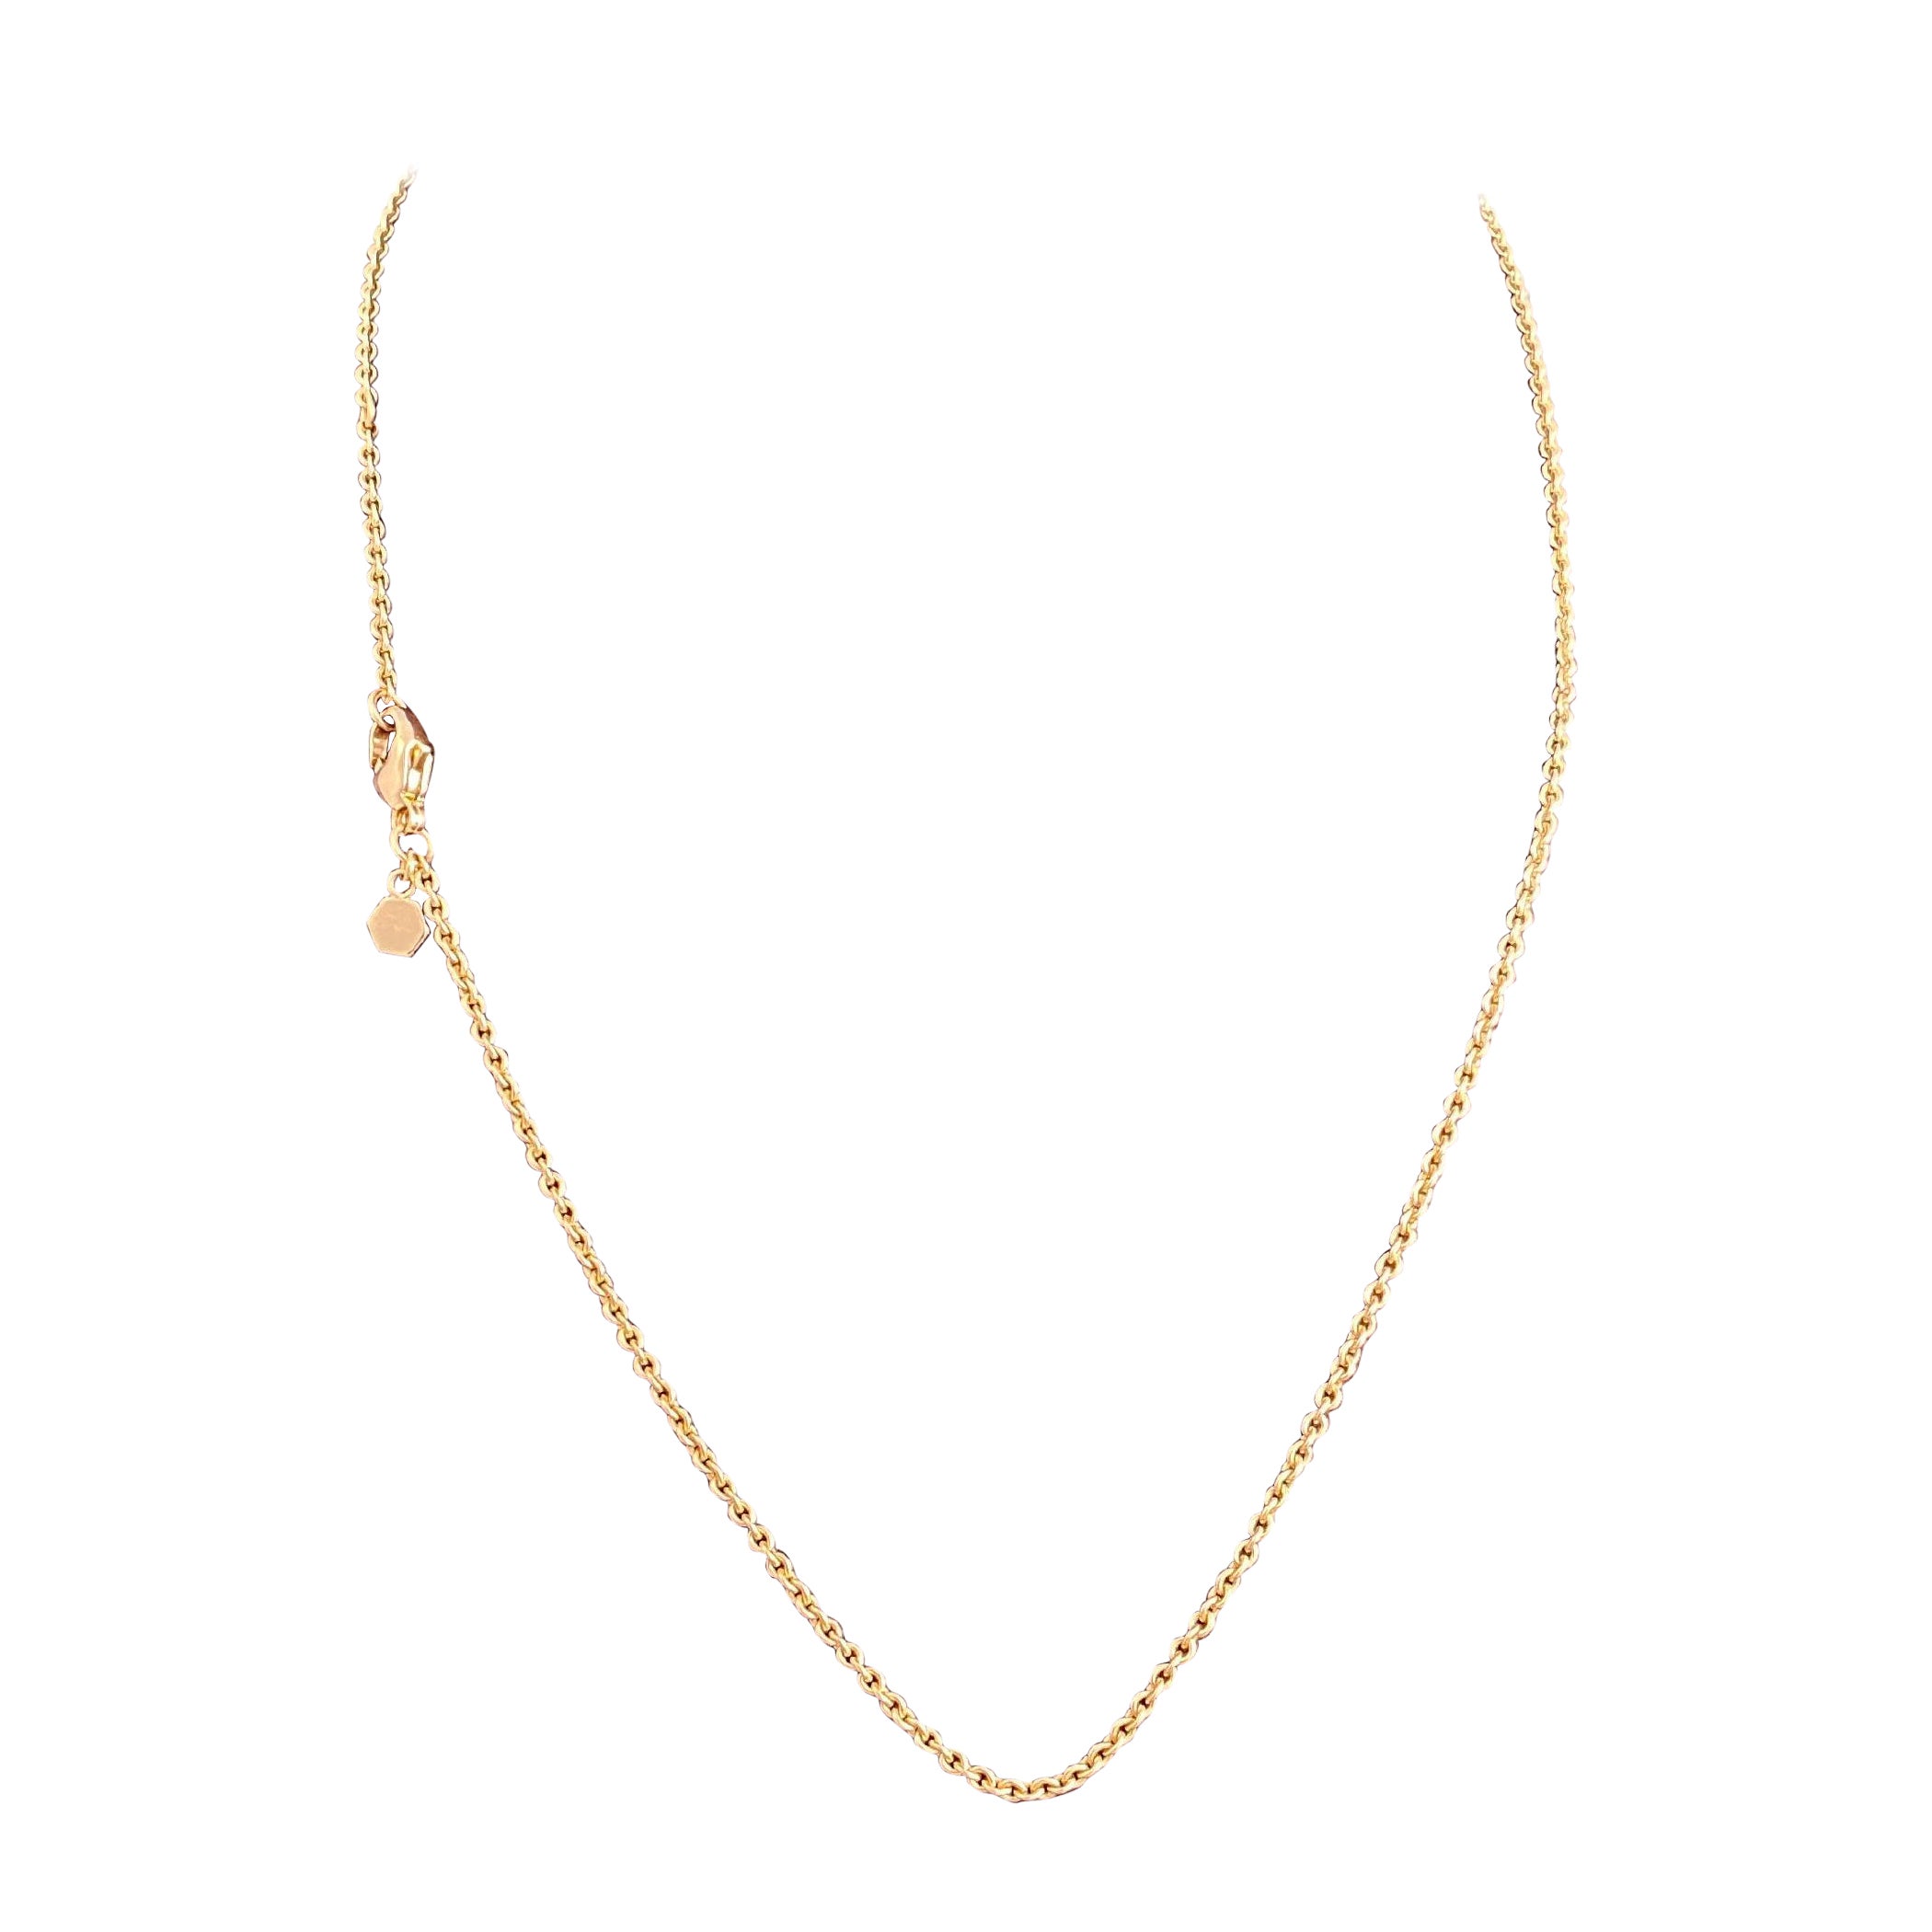 Victor Mayer Necklace Chain 18k Yellow Gold 46 cm Signature Gold Tag For Sale